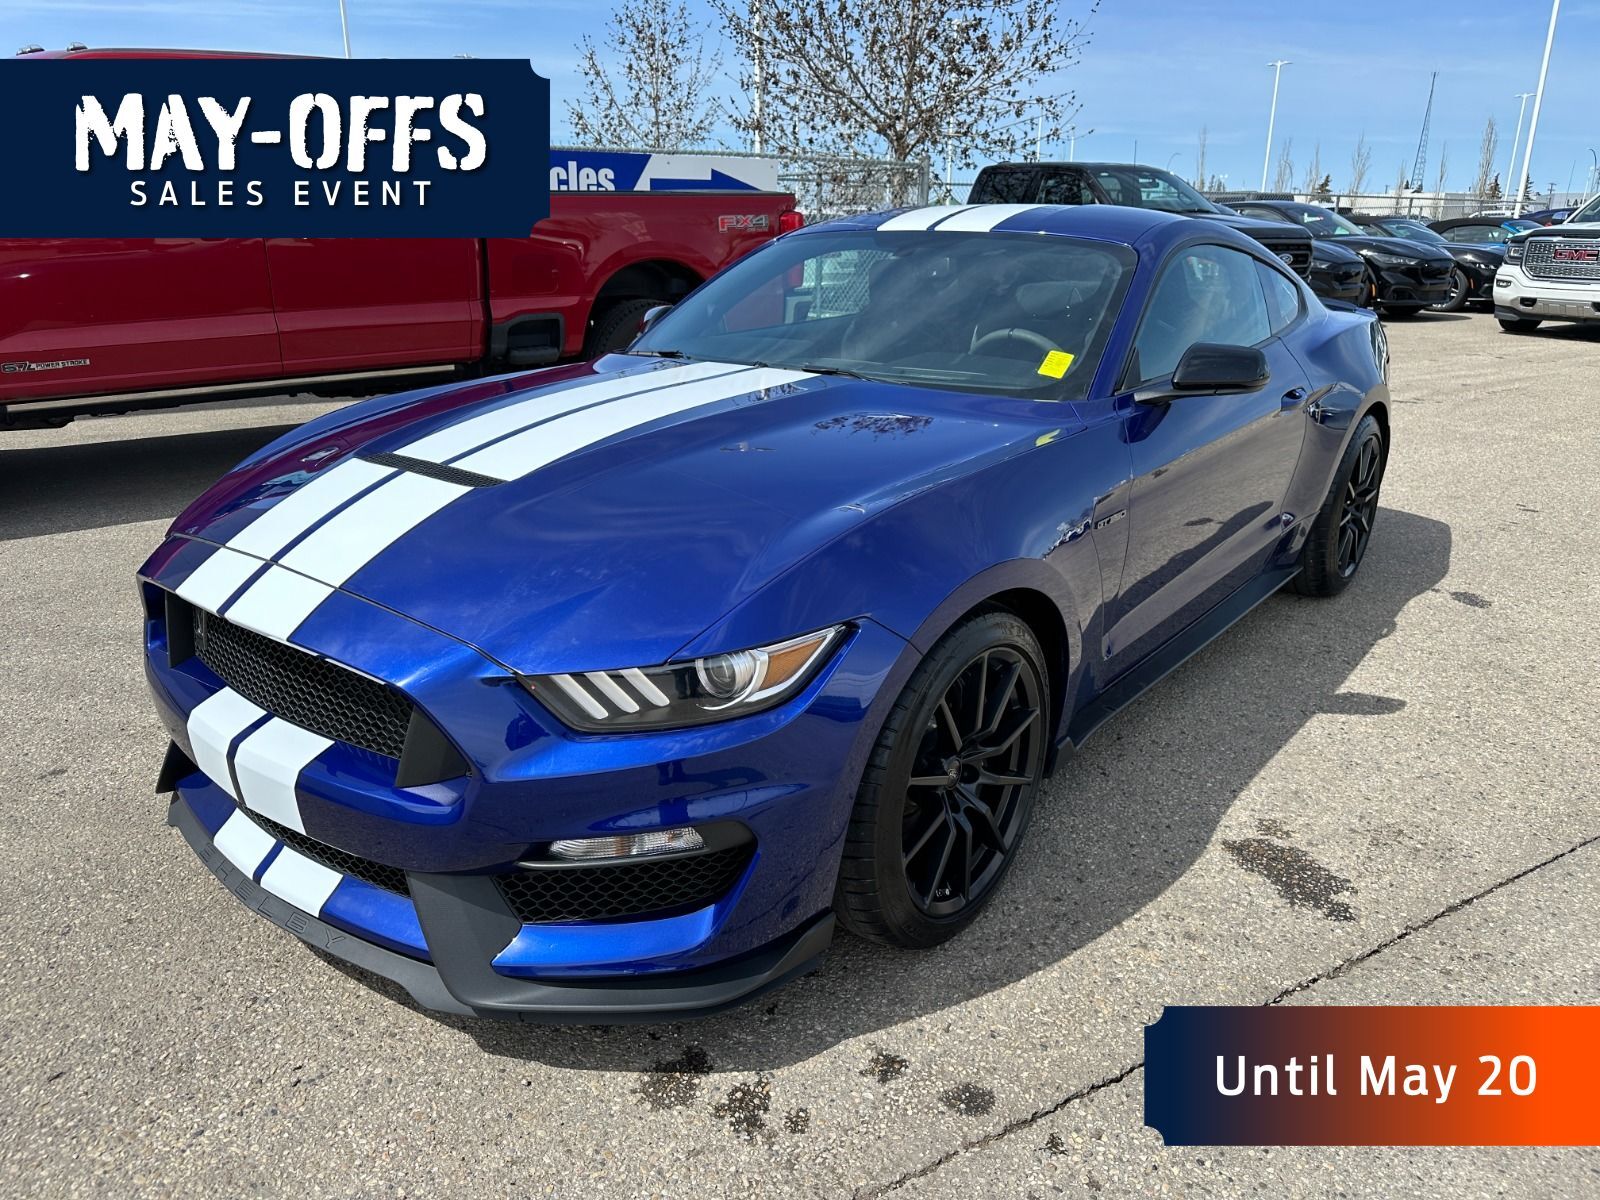 2016 Ford Mustang 5.2L V8 ENG, 6 SPEED MANUAL, SHELBY GT350, REVERSE